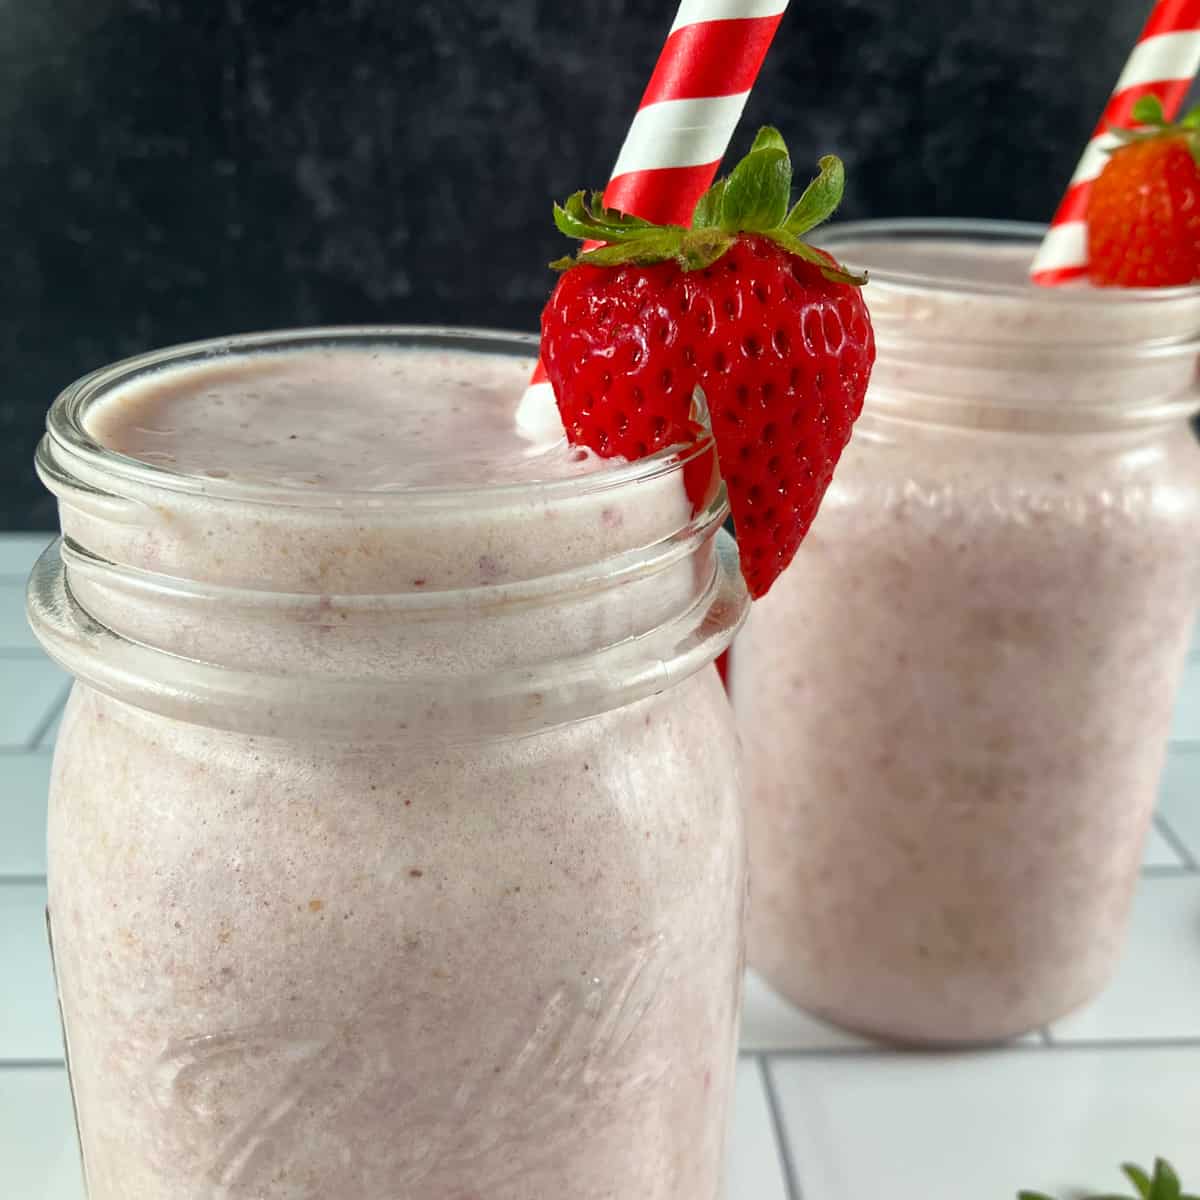 Is a banana/strawberry milkshake good for a weight loss drink? - Quora